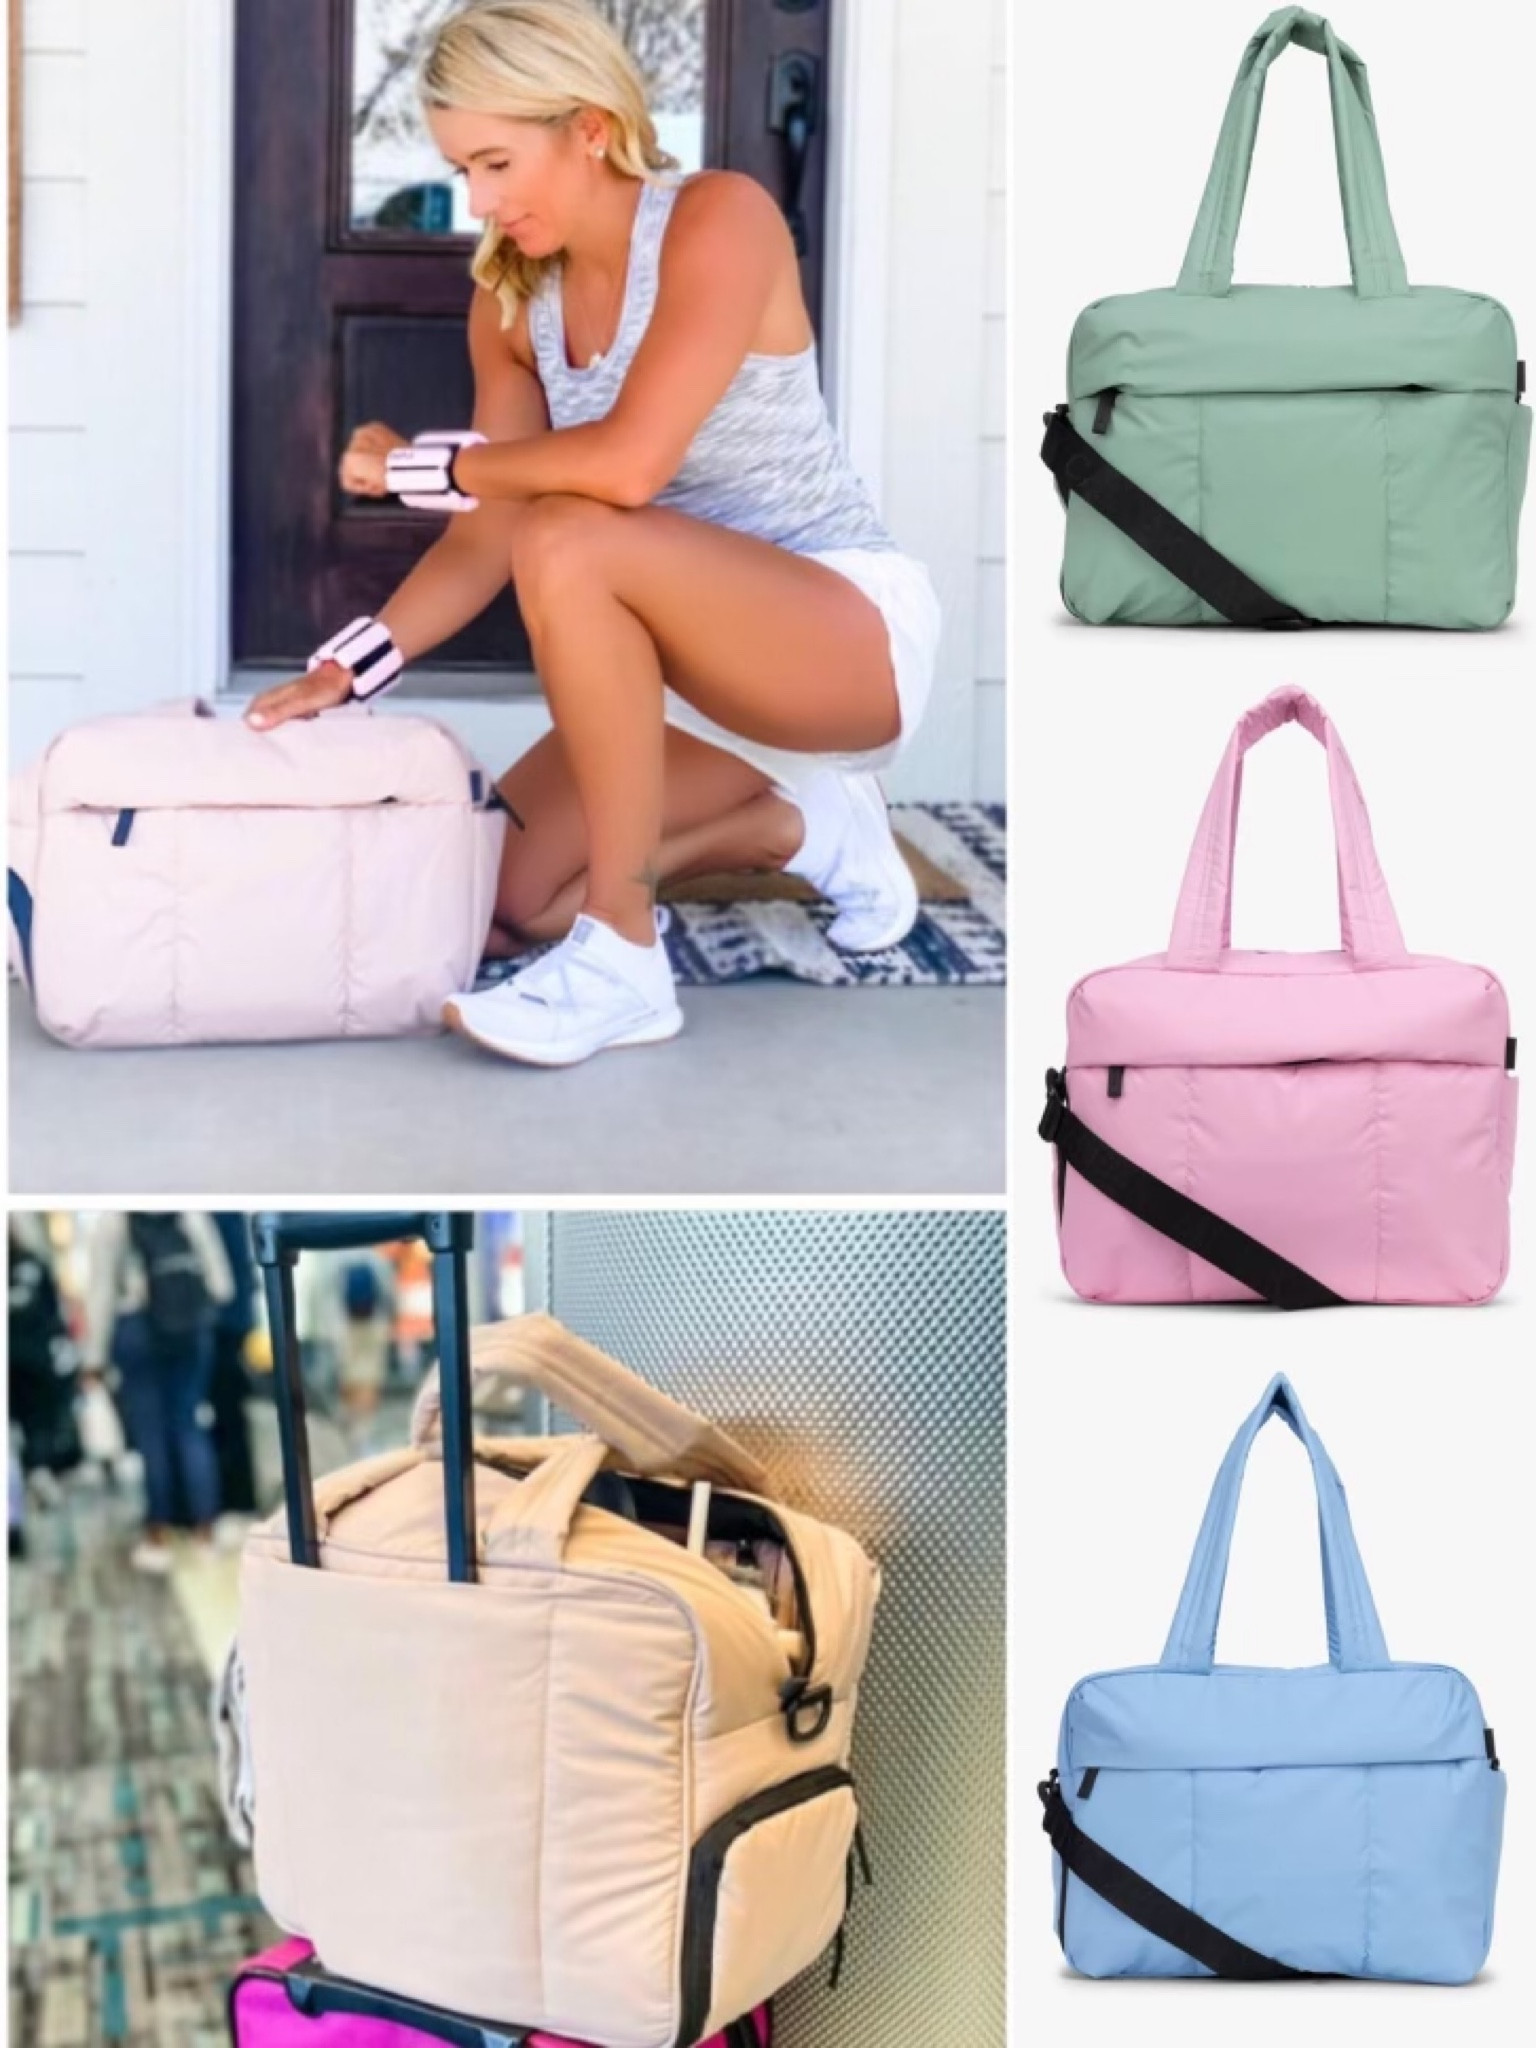 The Calpak Luka Duffel Is Back in Stock and on Sale Now - PureWow